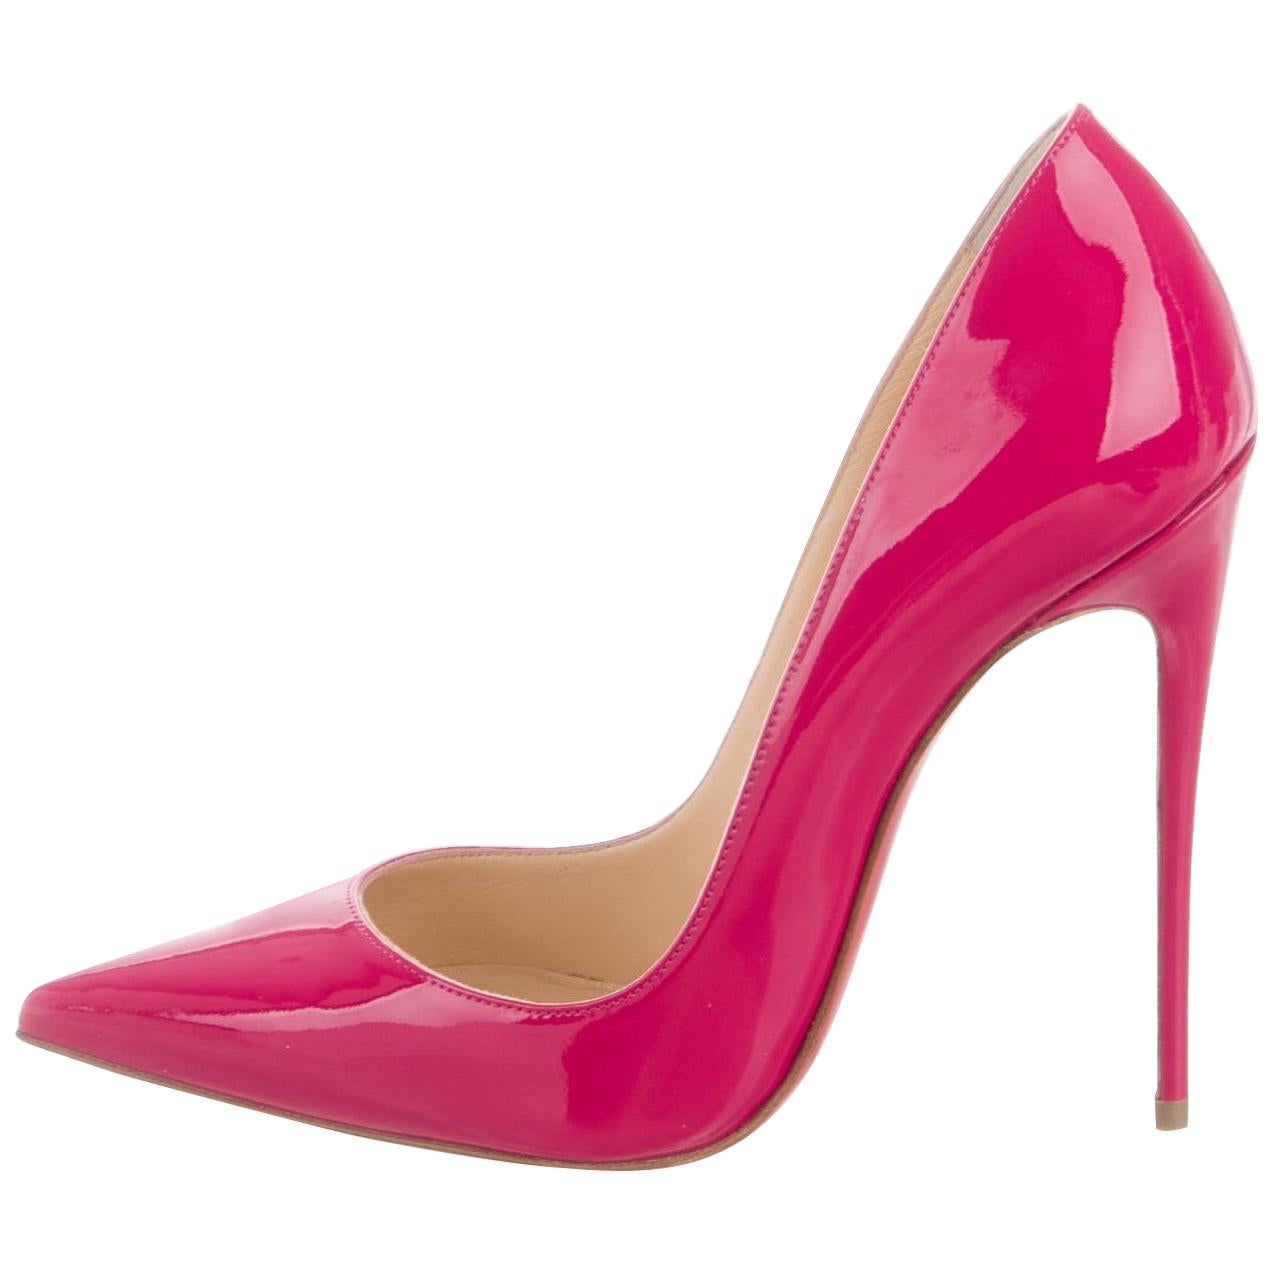 Christian Louboutin NEW Fuchsia Patent Leather Kate High Heels Pumps in Box